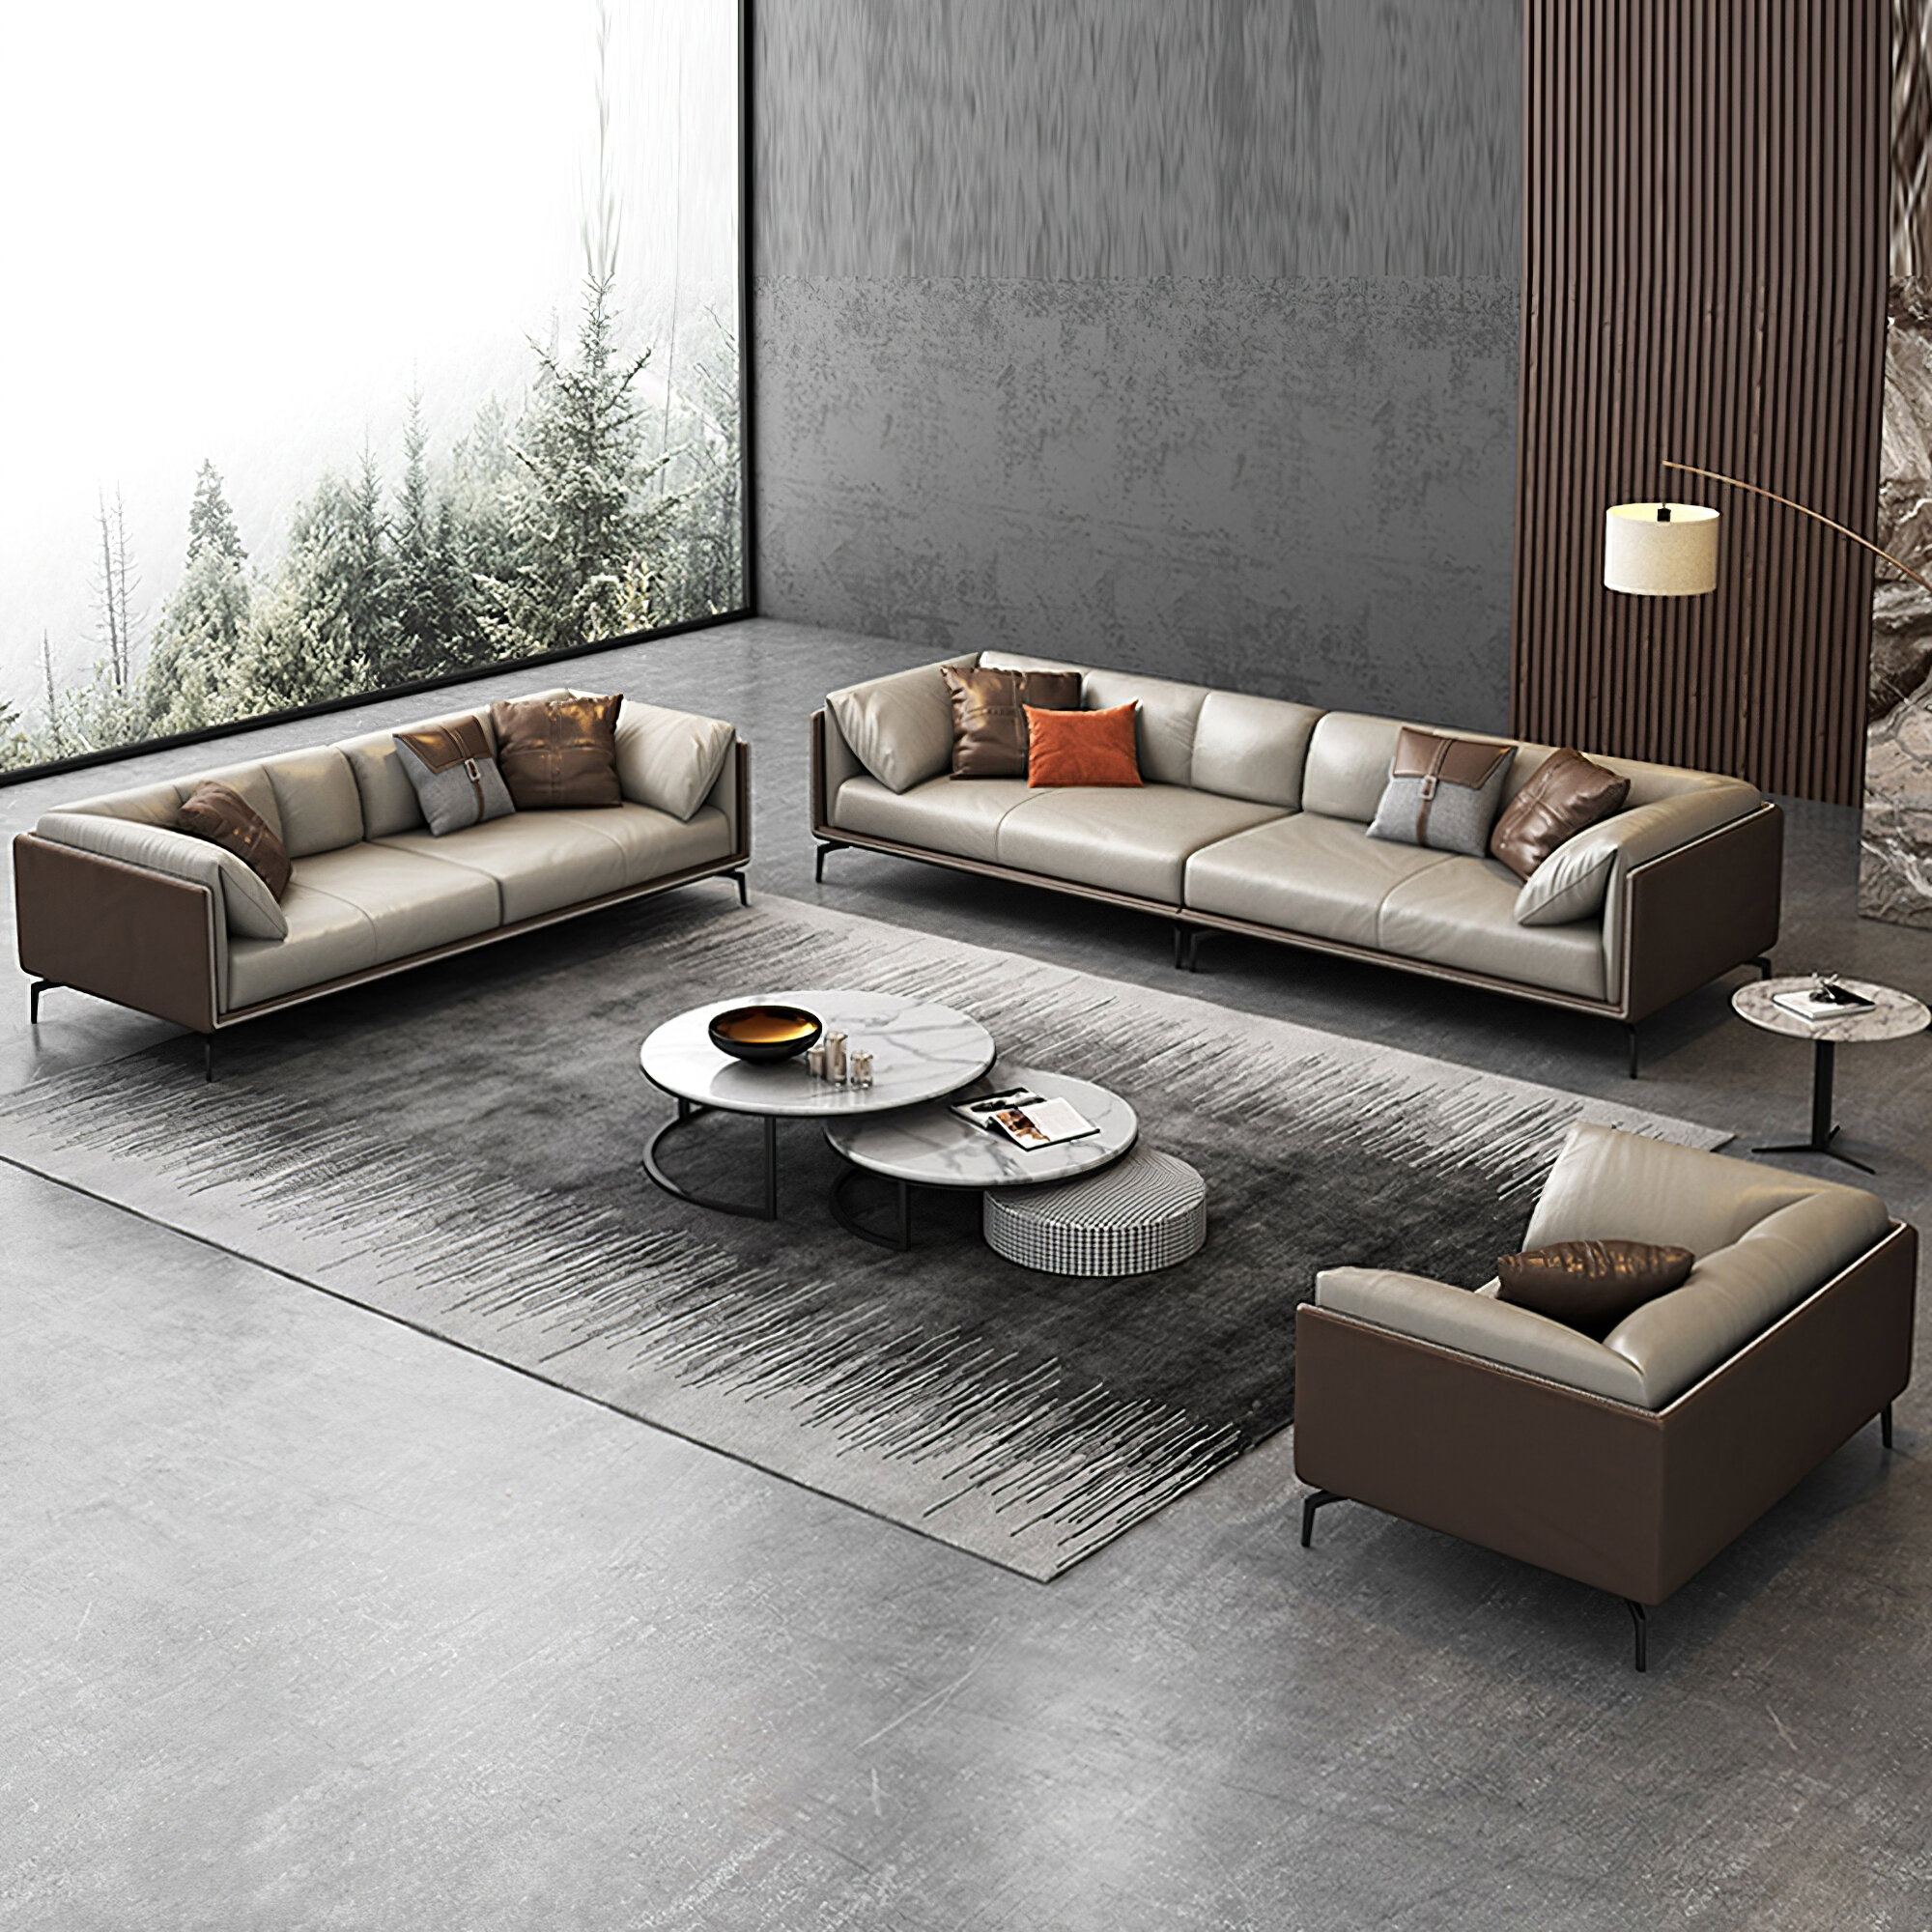 Gray leather sofa for a stylish modern living room